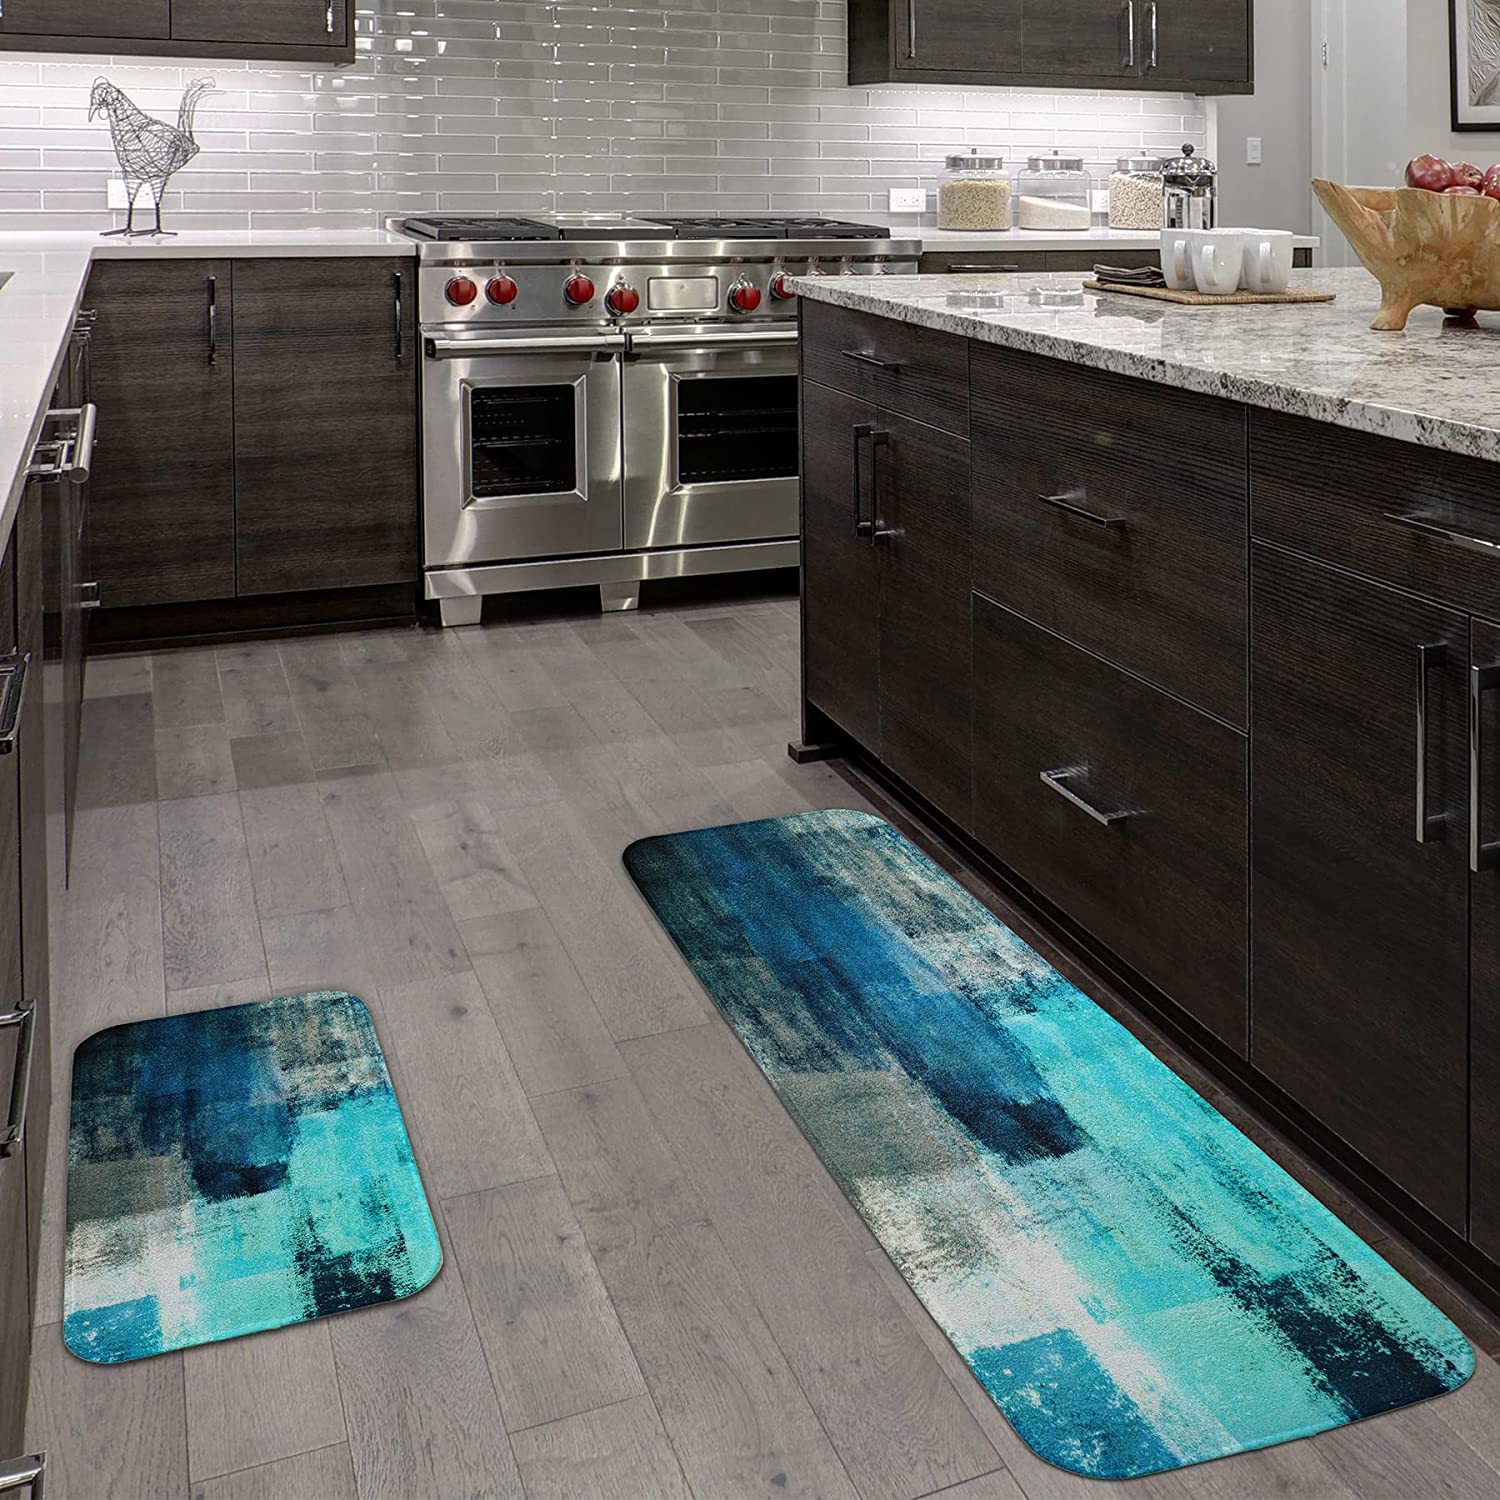 JXIONGF Soft Kitchen Rugs 2 Pieces, Turquoise Grey Abstract Art Painting  Washable Non-Slip Kitchen Mat Set 16 x 24+16 x 48 Rug for Kitchen